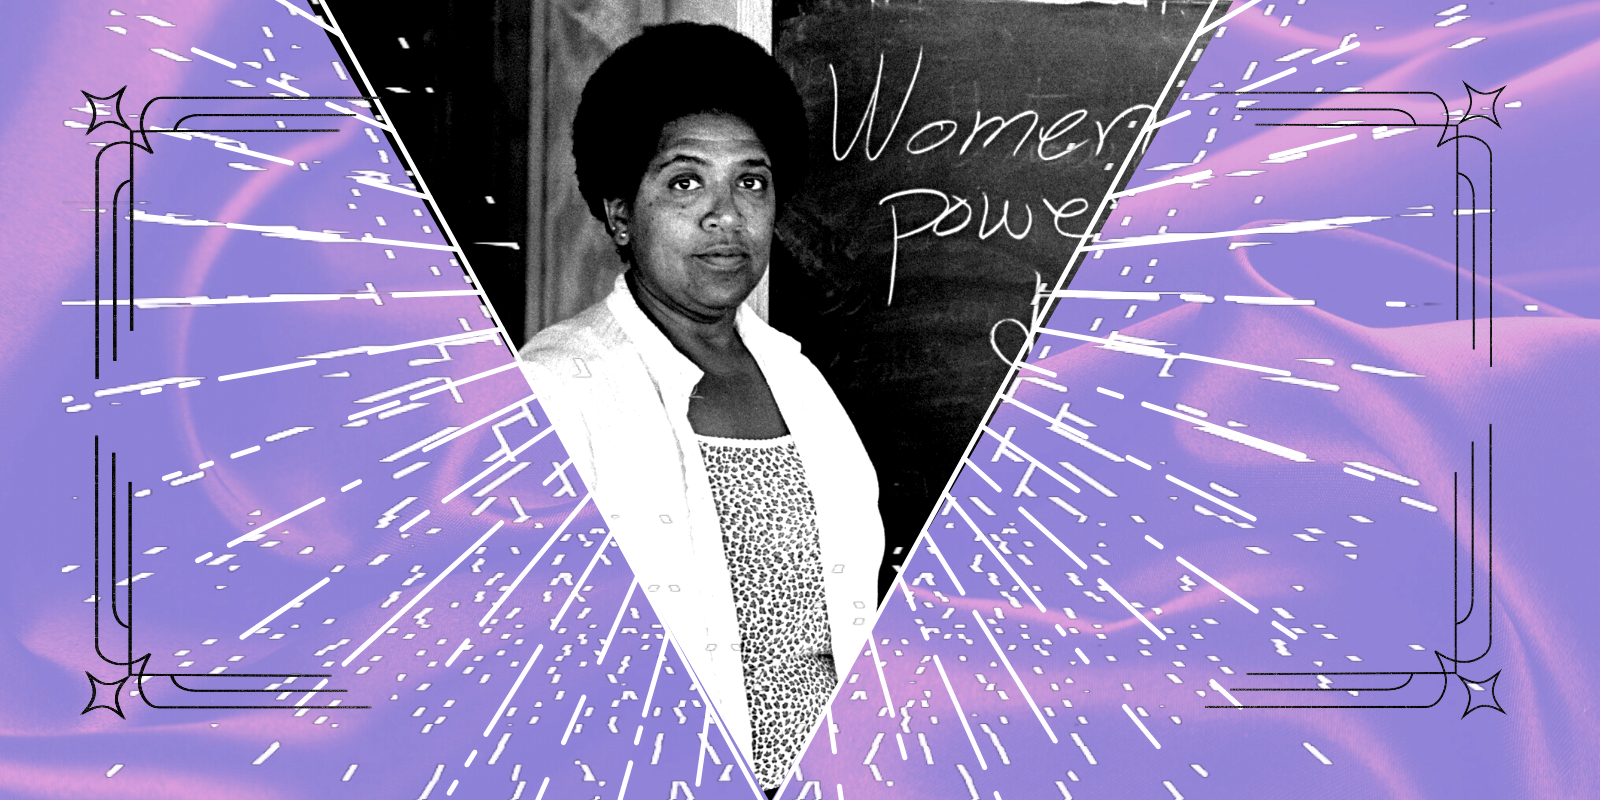 Image from Getty images Audre Lorde stands at a blackboard and lectures while an artist in residence at Atlantic Center for the Arts